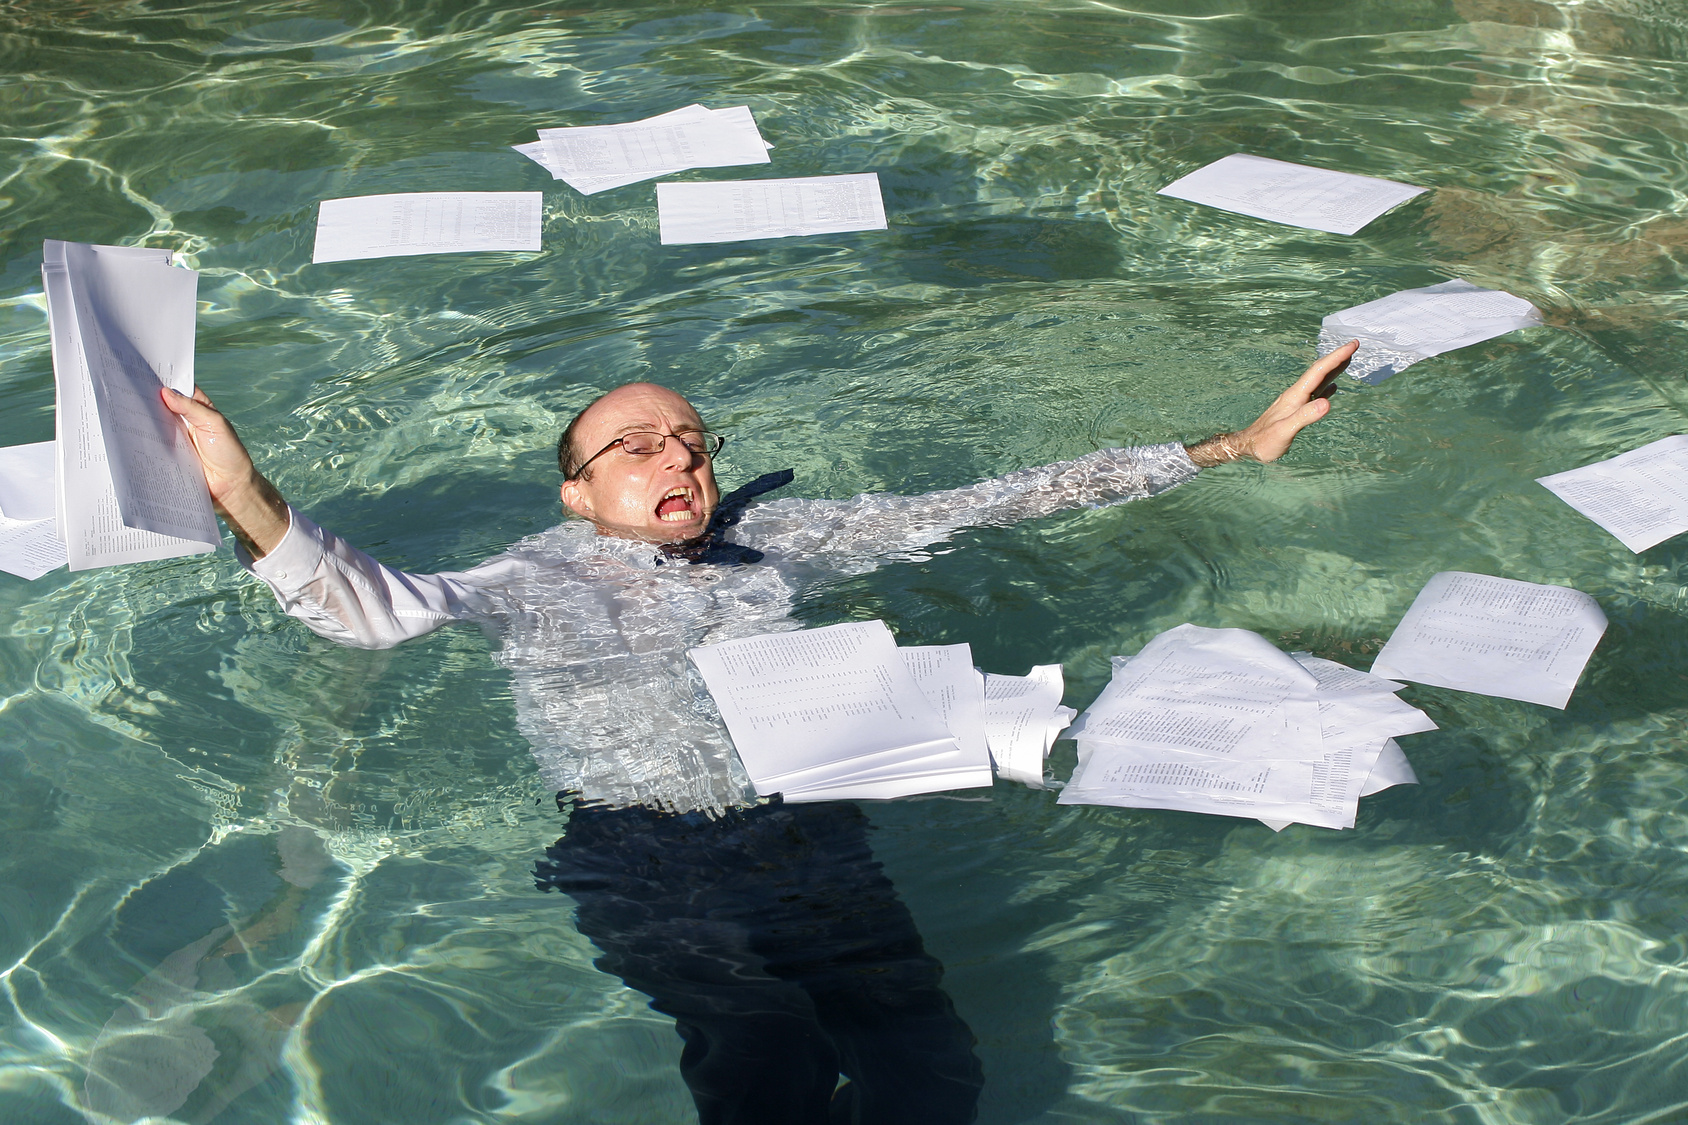 Drowning In Work Quotes.